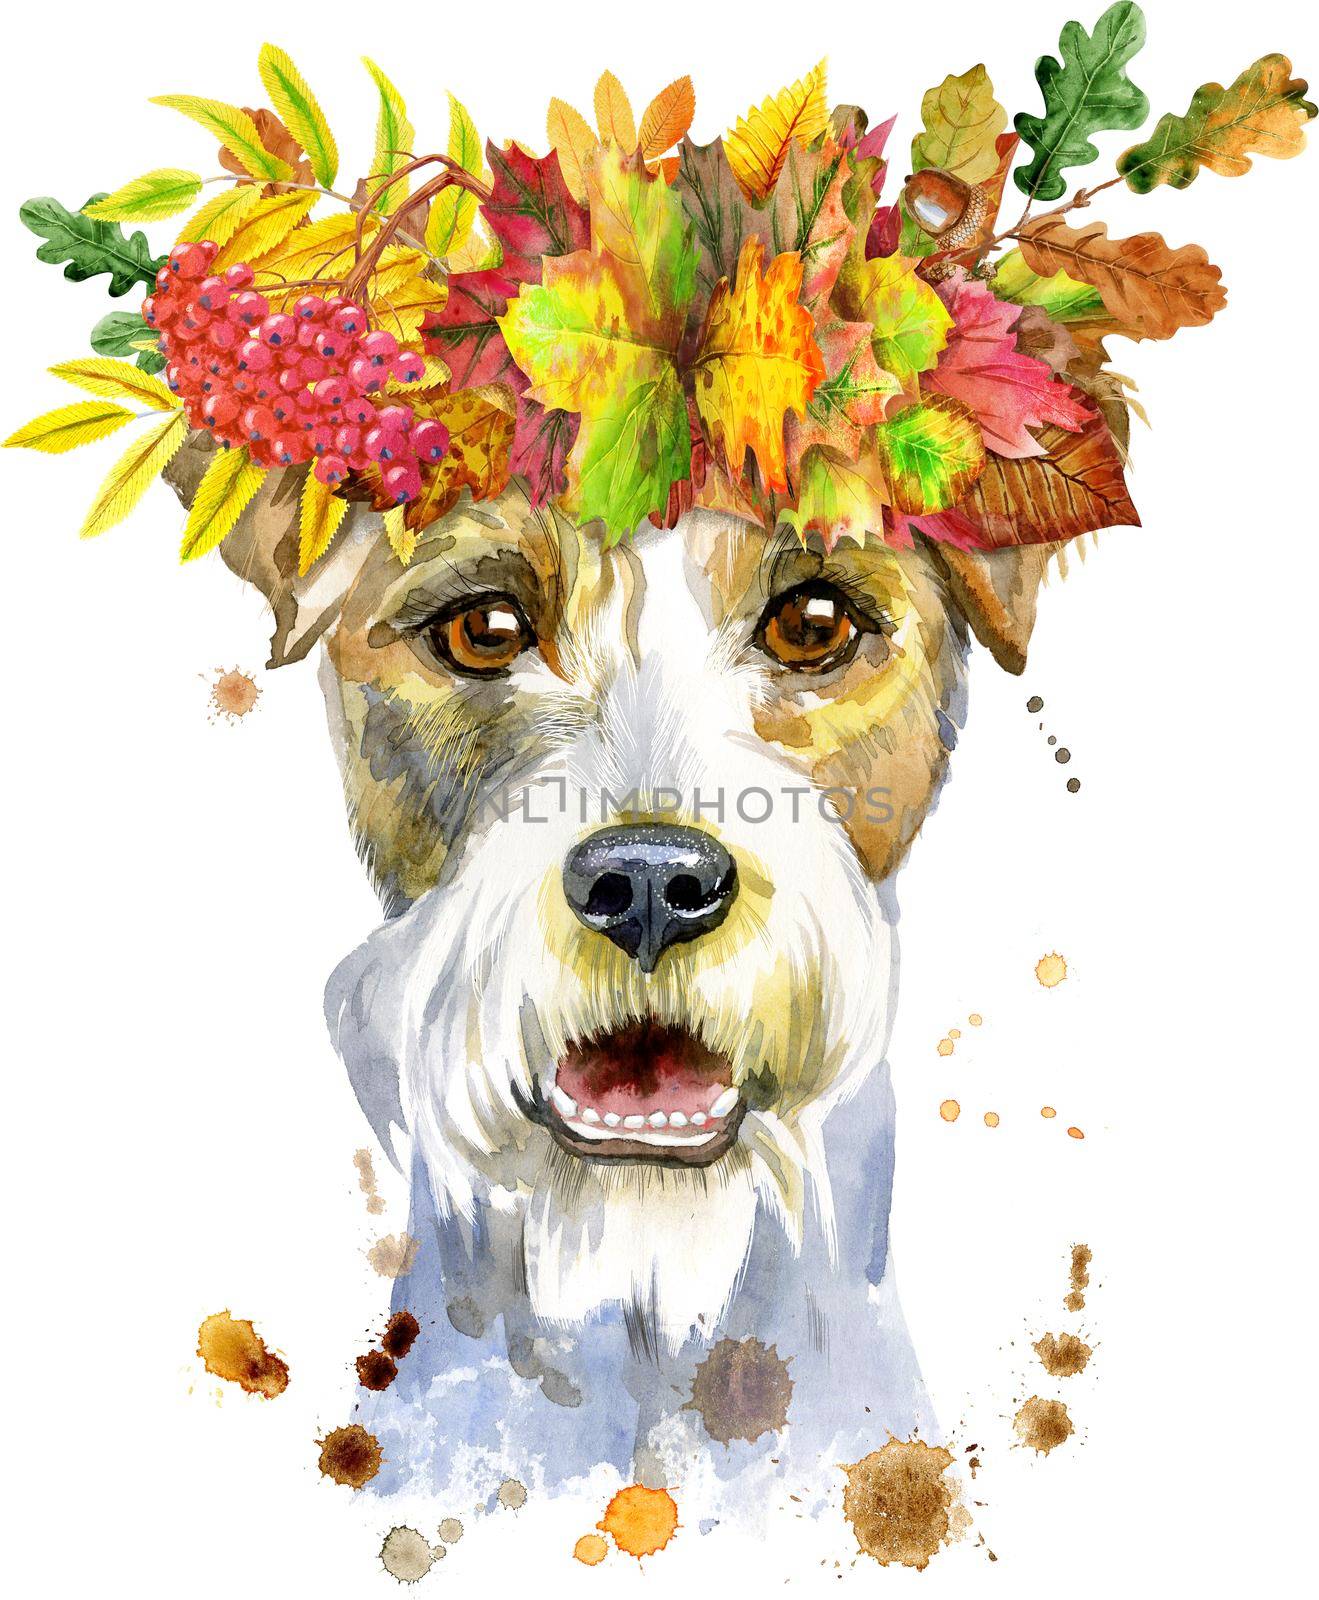 Watercolor portrait of airedale terrier dog in a wreath of autumn leaves by NataOmsk